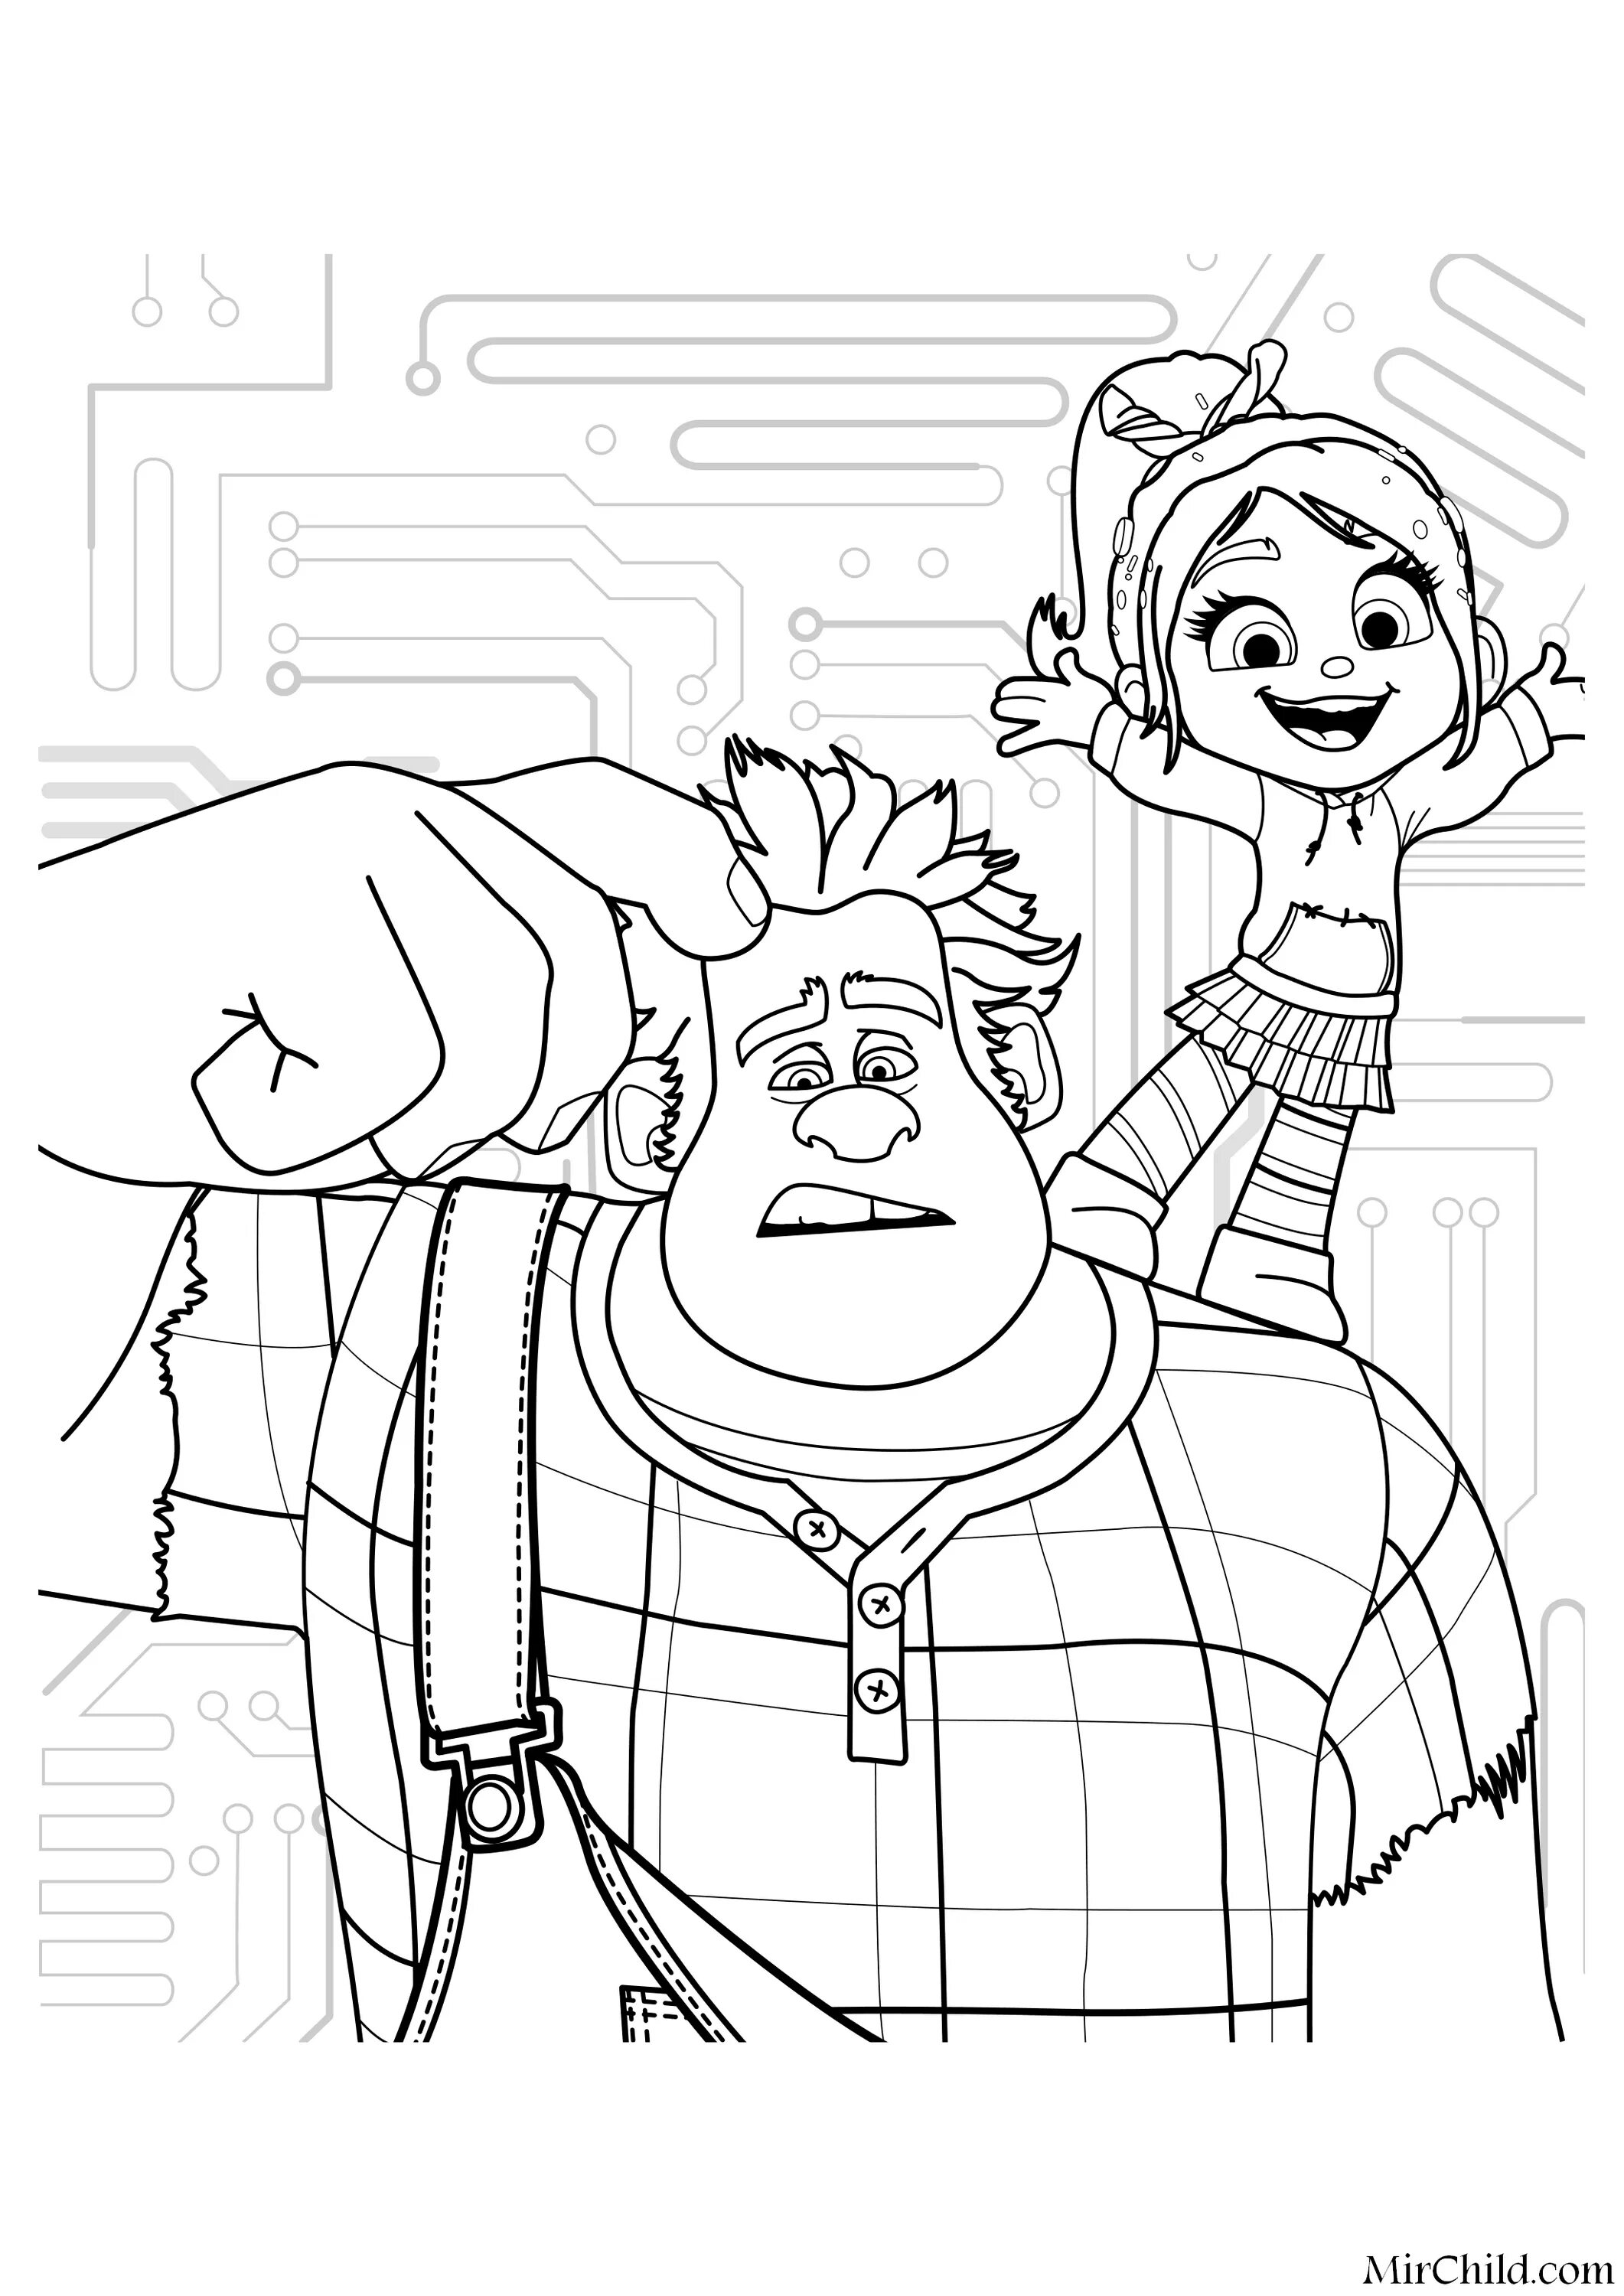 Coloring page festive penelope